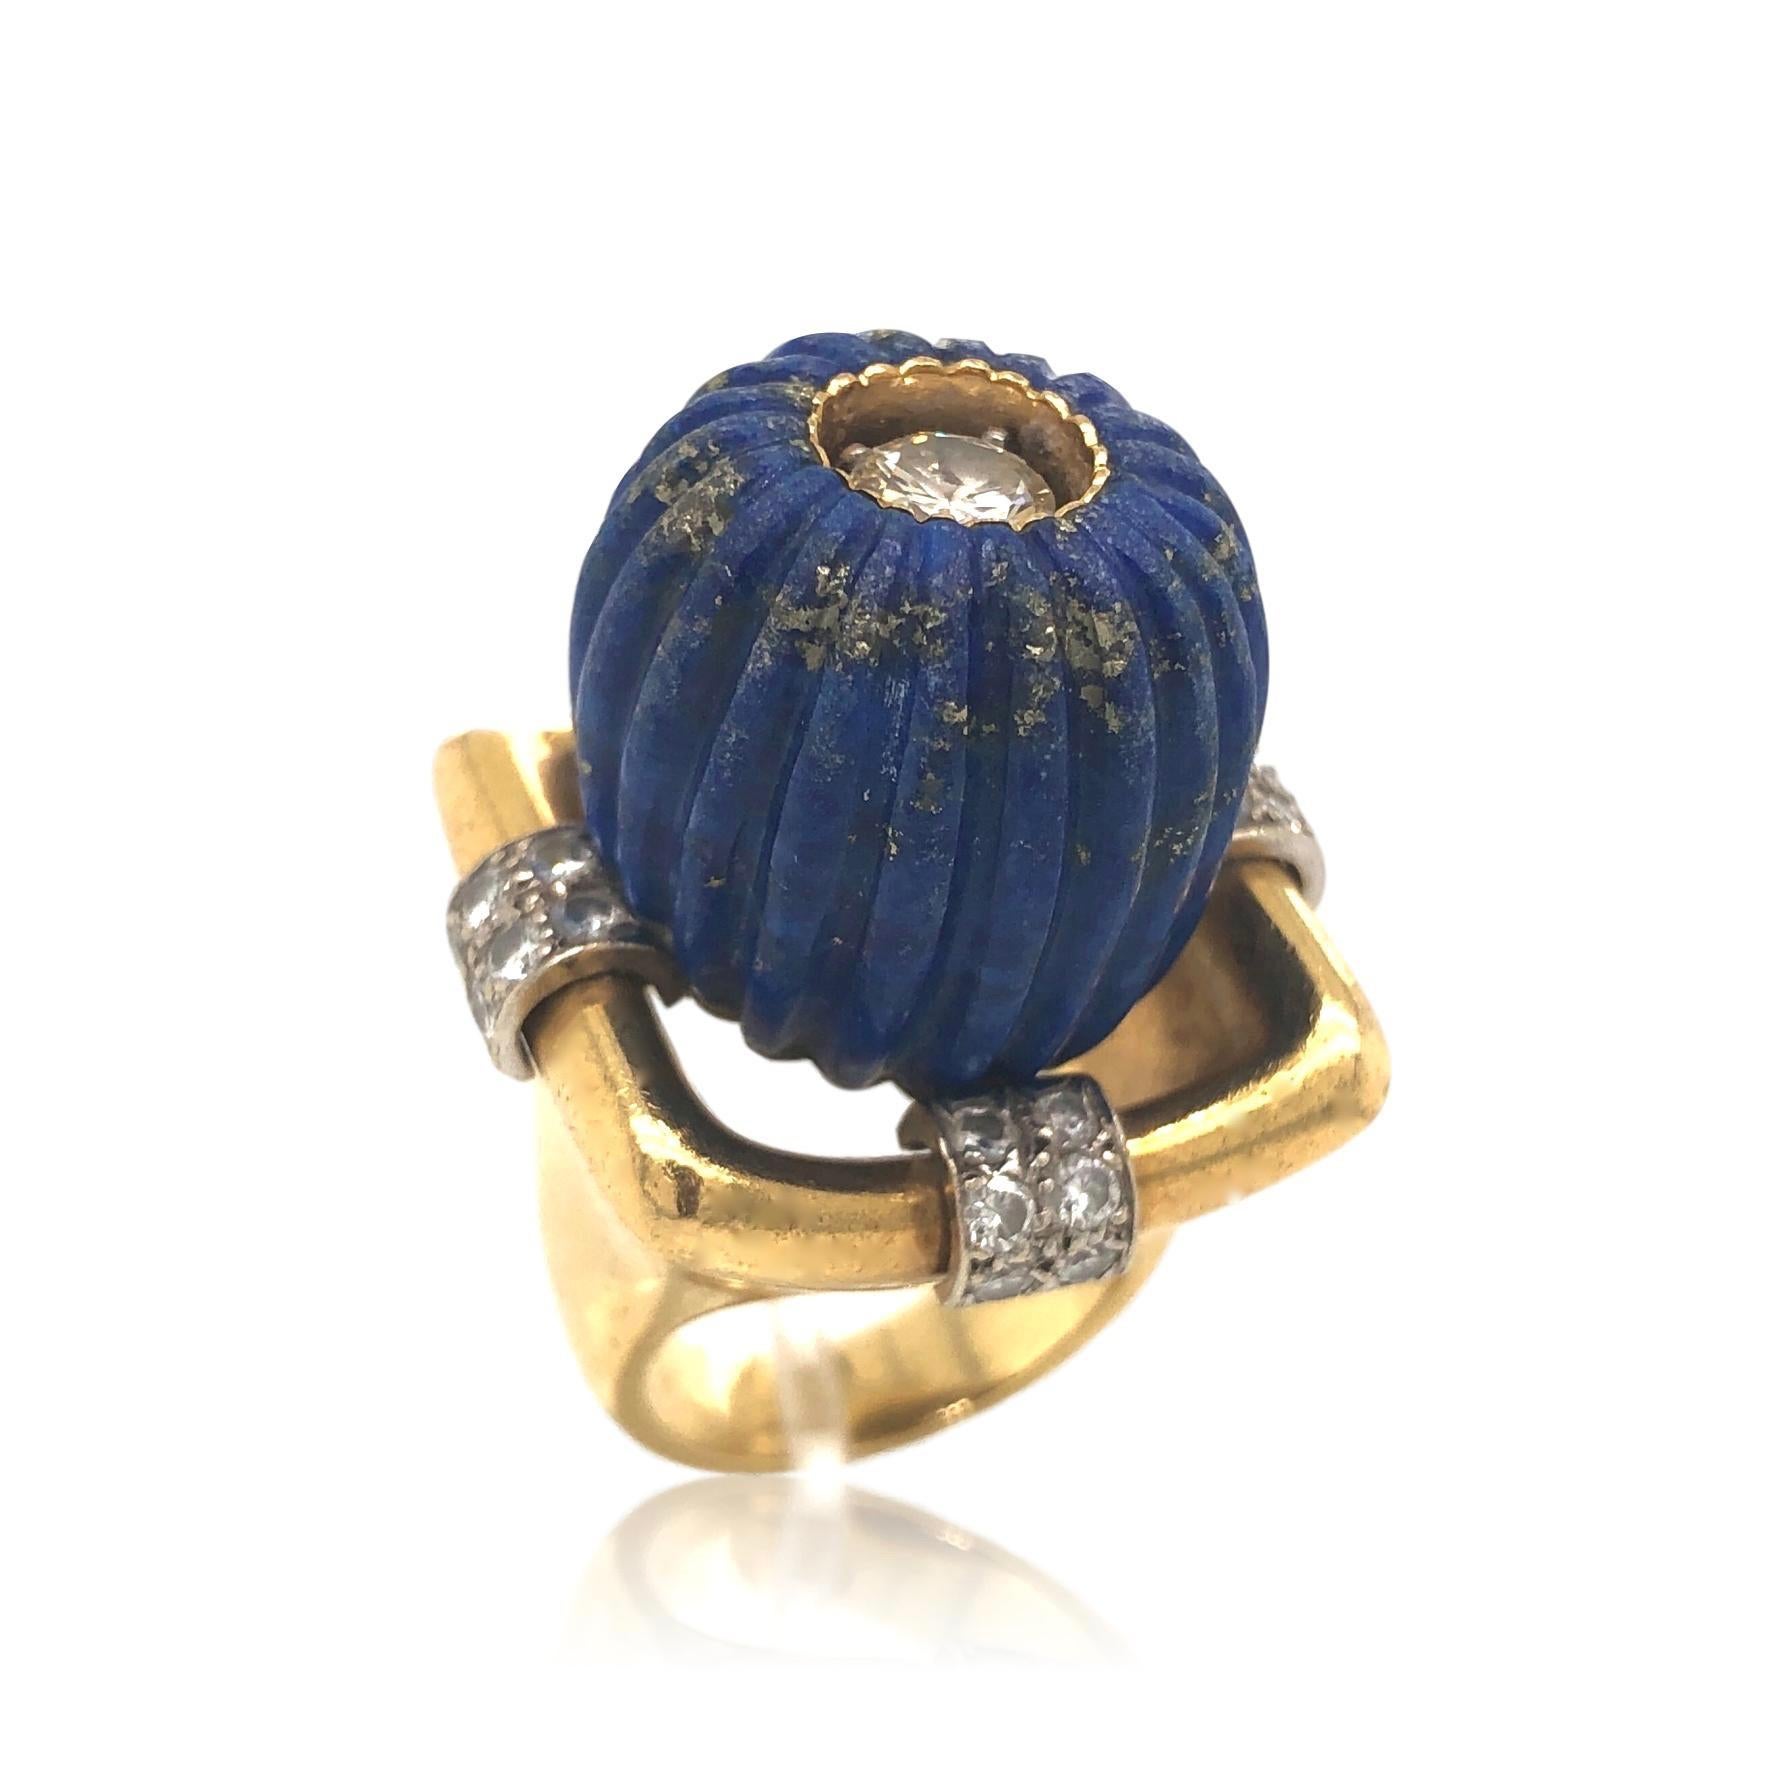 70's Cocktail ring with lapis, gold and diamond. The 18k yellow gold ring shank with a massive 1 3/4